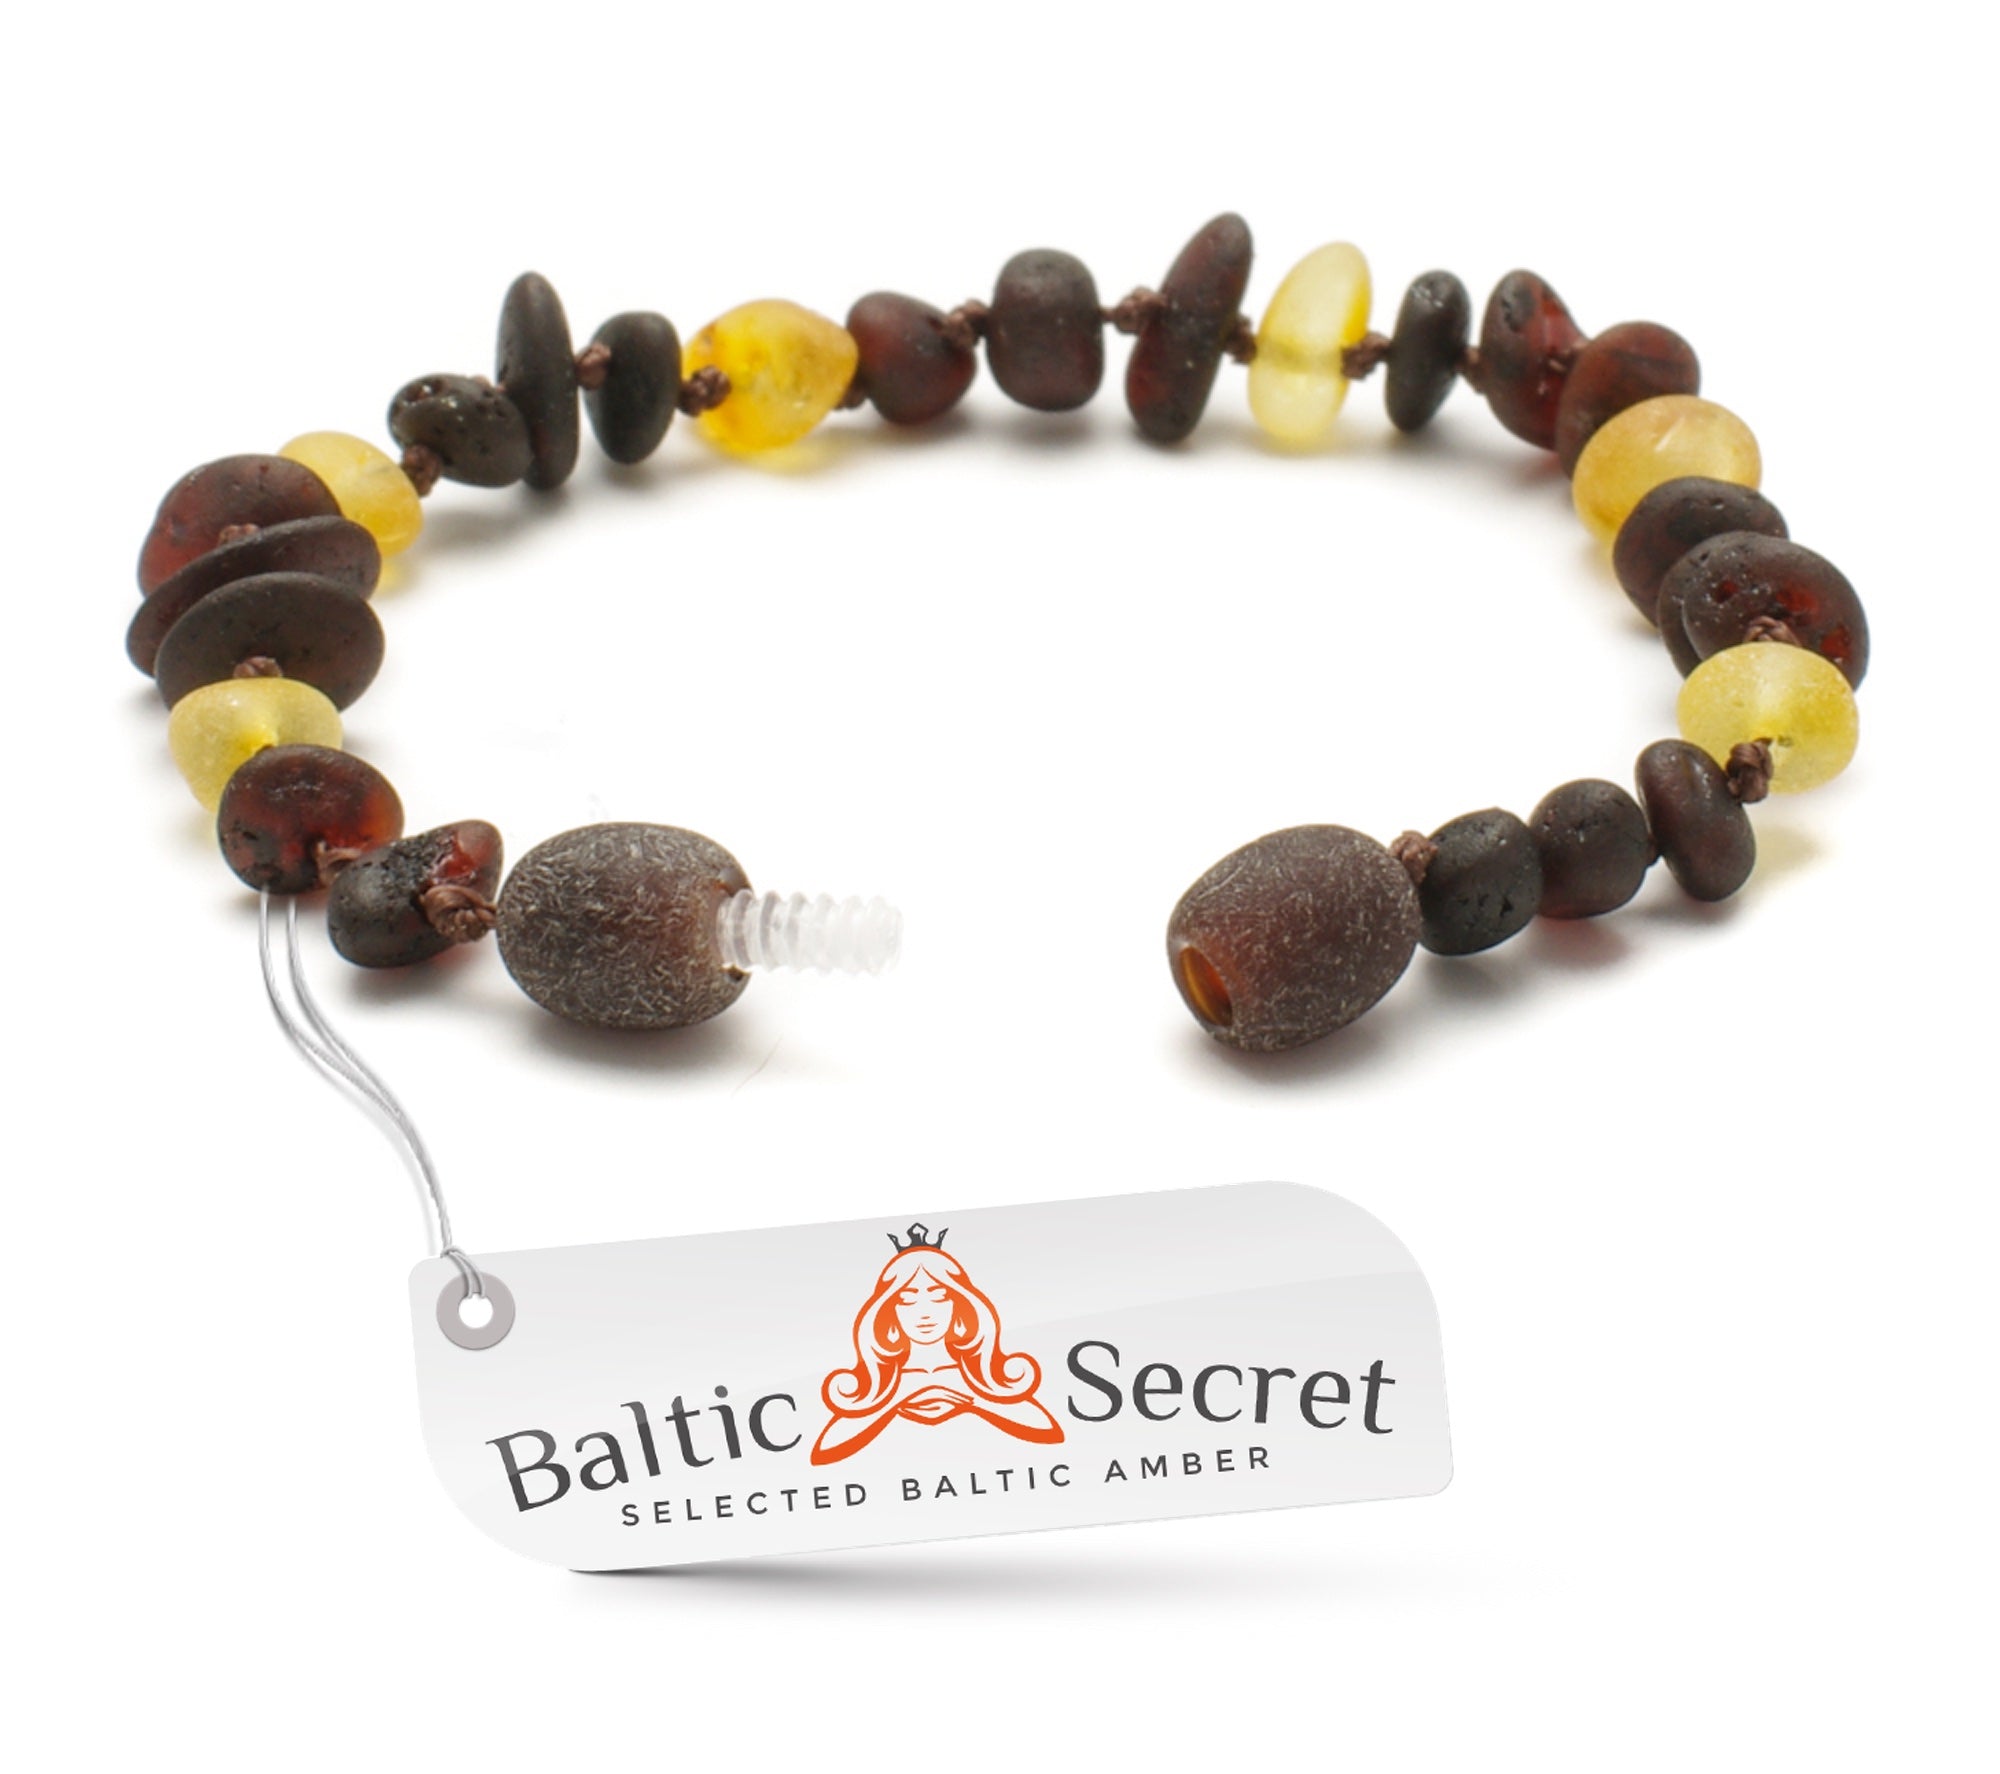 Premium Raw Baltic Amber Necklace and/or Bracelet For Children / Extra Safe